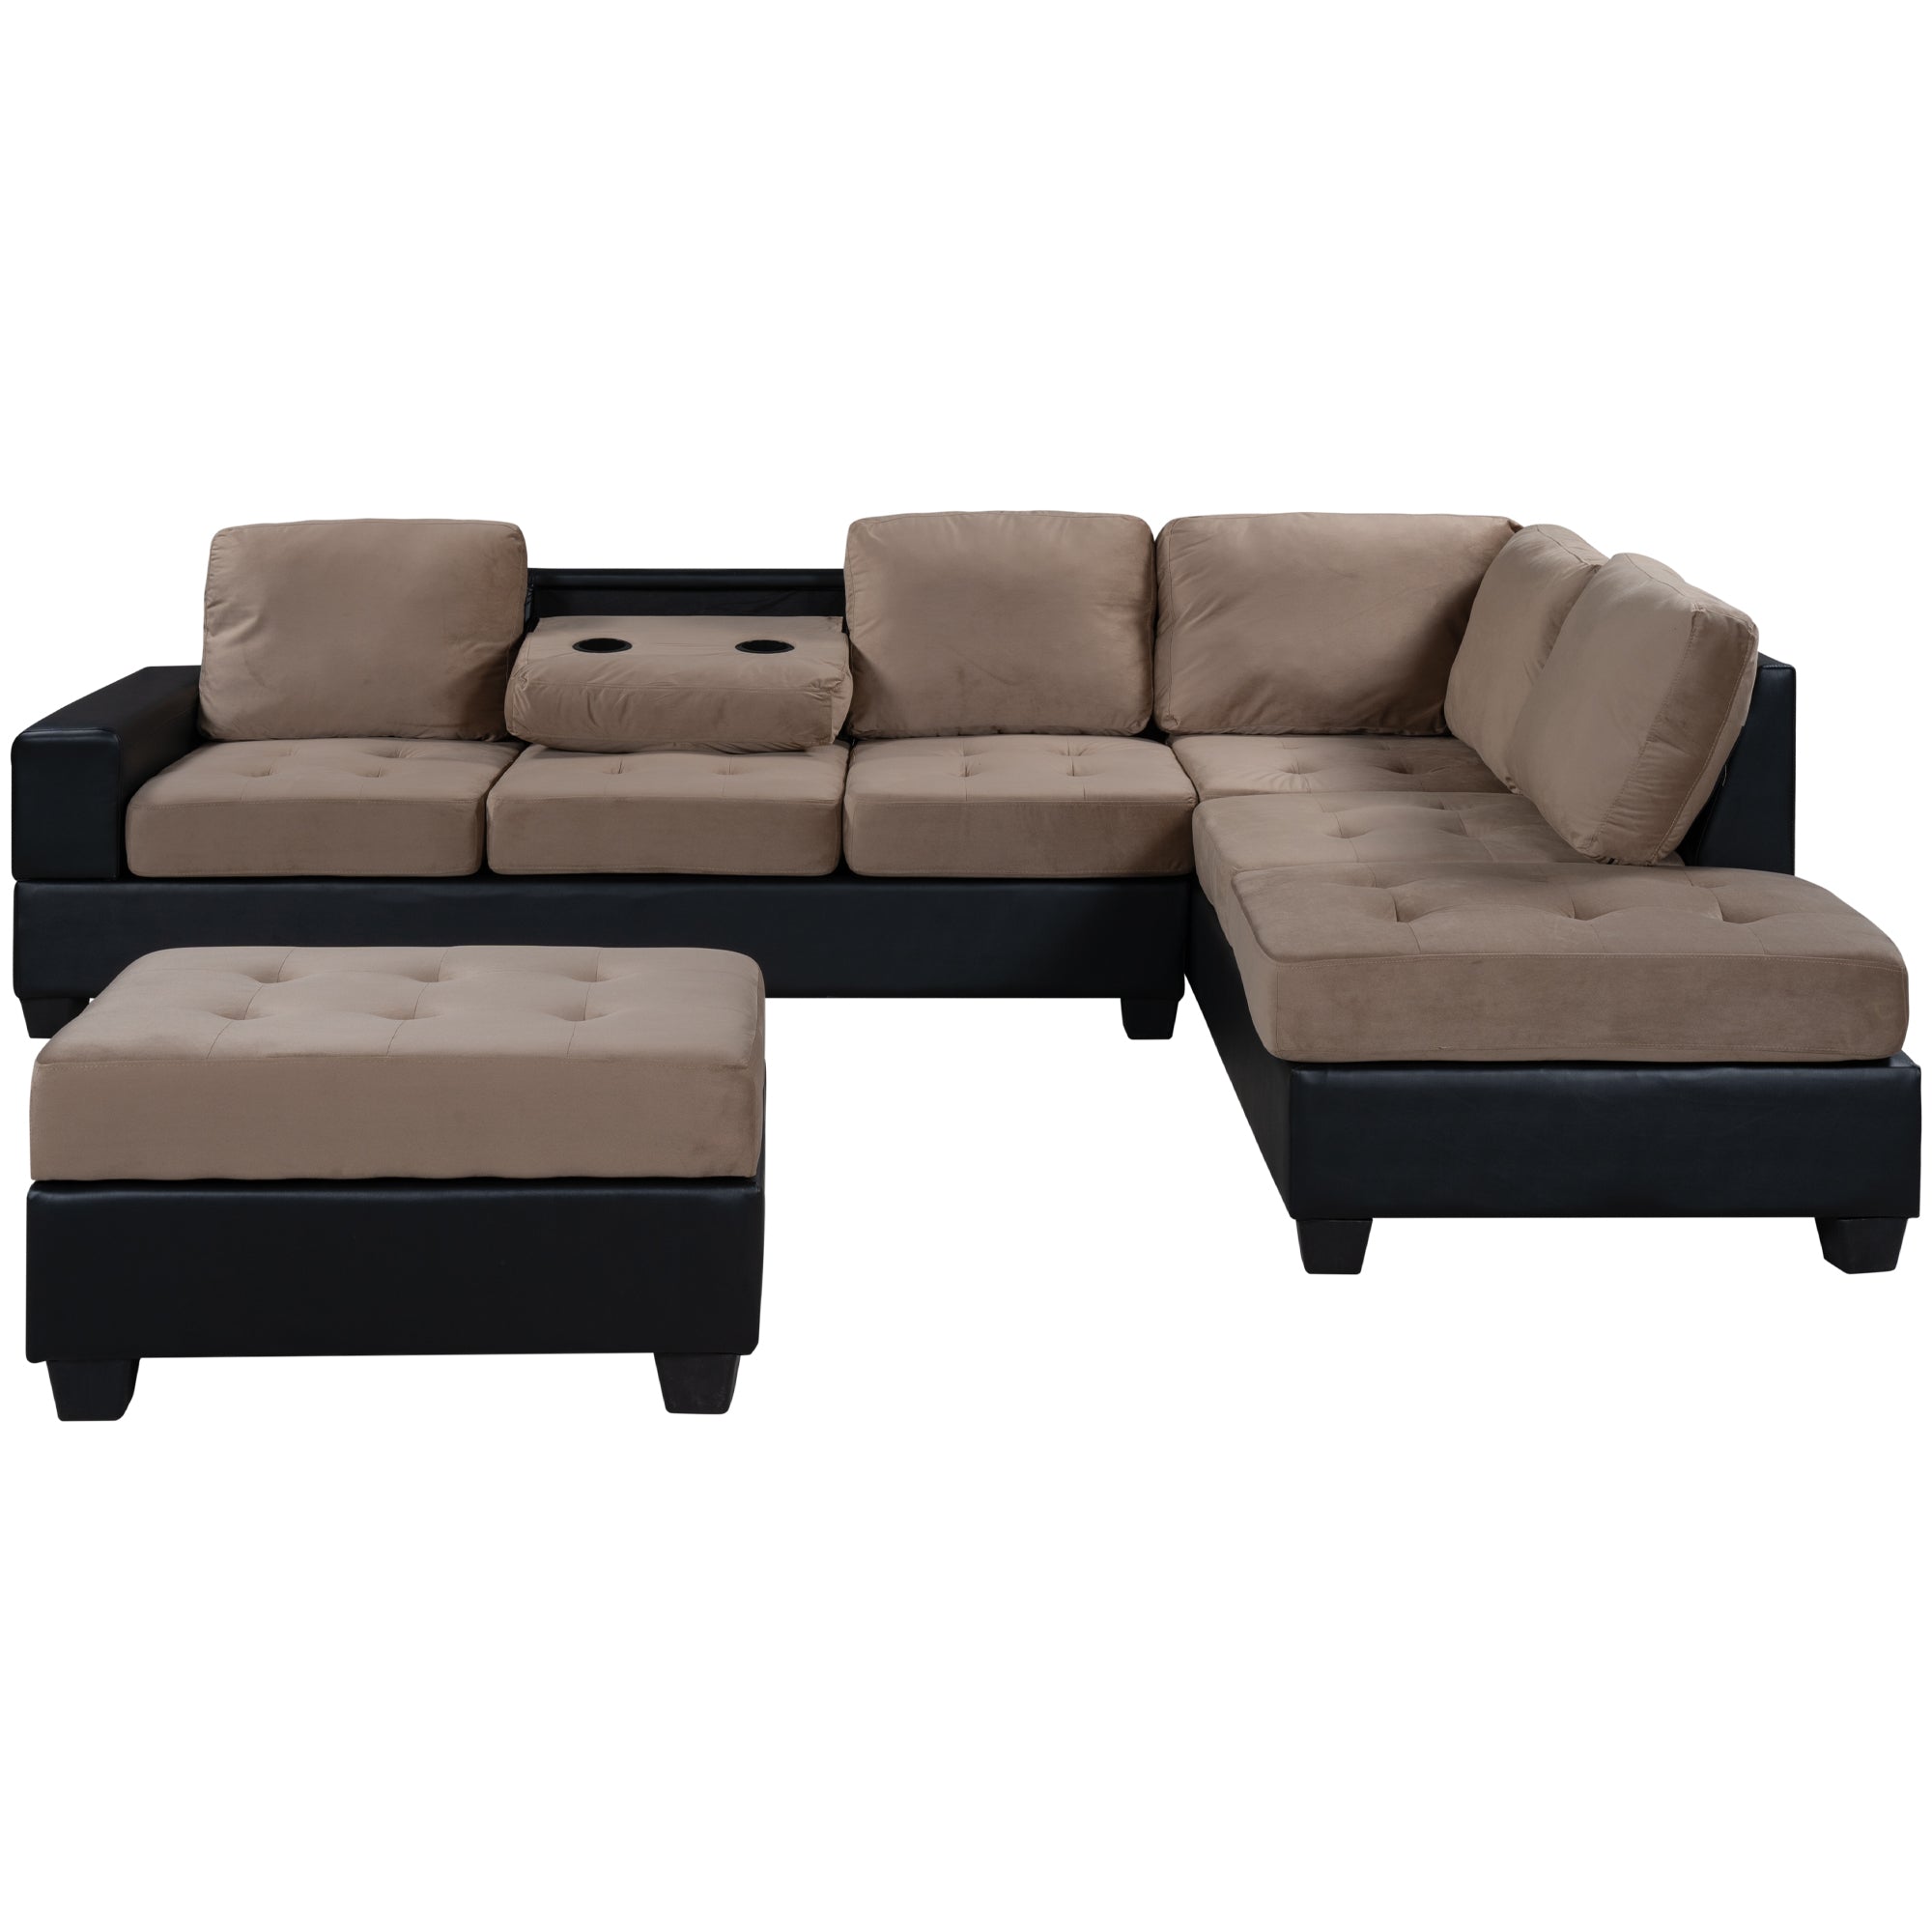 Convertible L Shaped Sectional Sofa with Reversible Chaise, Storage Ottoman and Two Cup Holders-Boyel Living